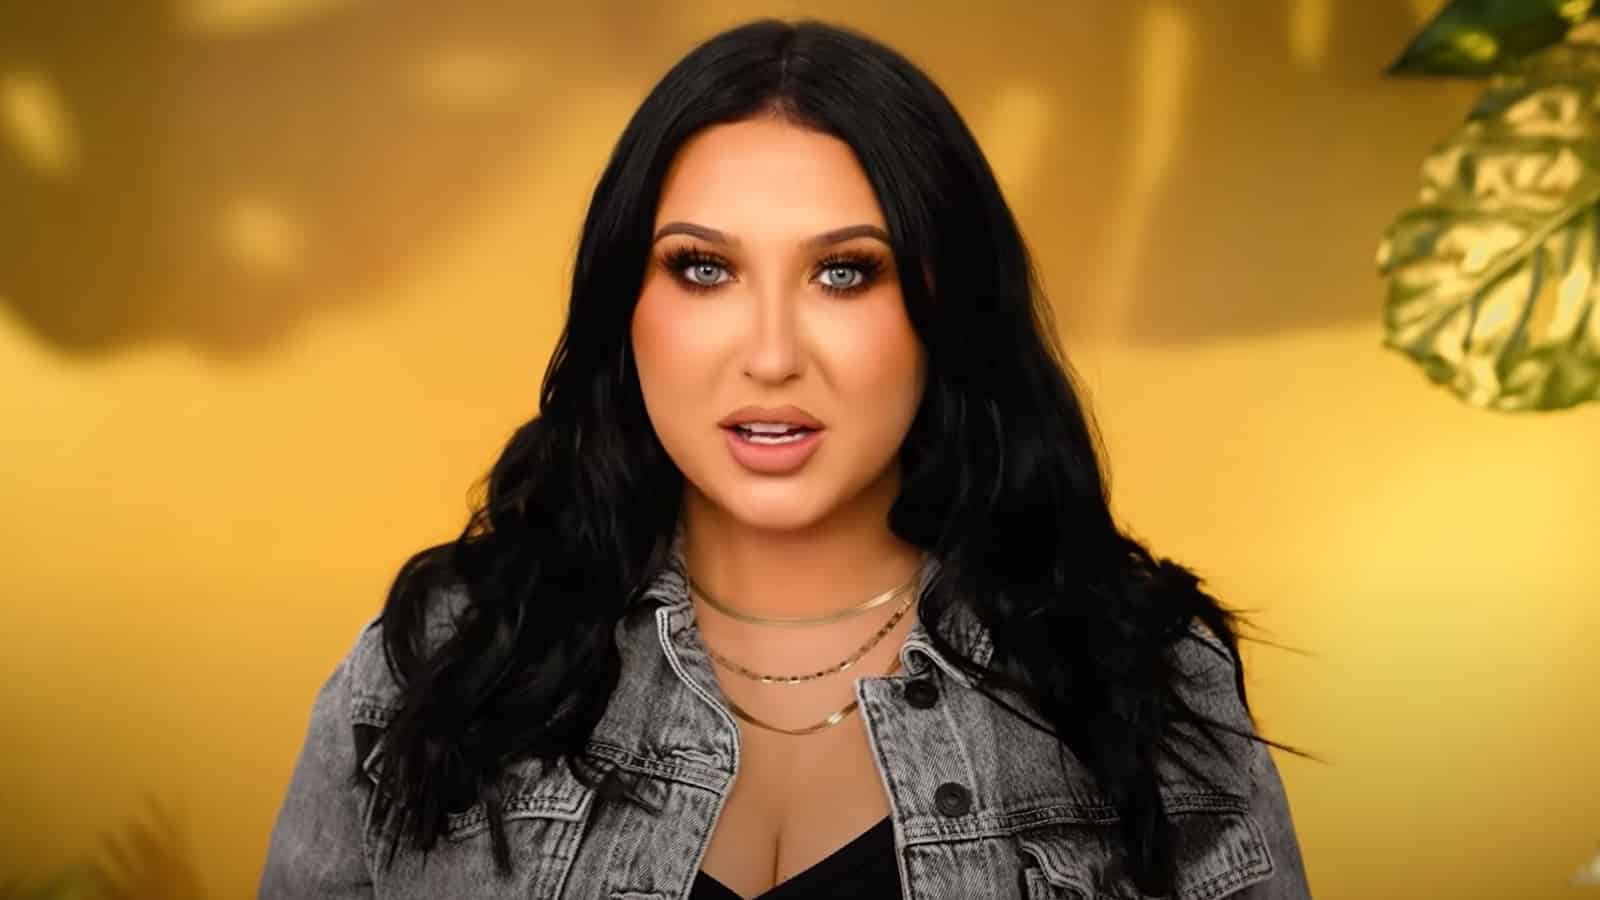 Jaclyn Hill hits back at accusations of faking near kidnapping